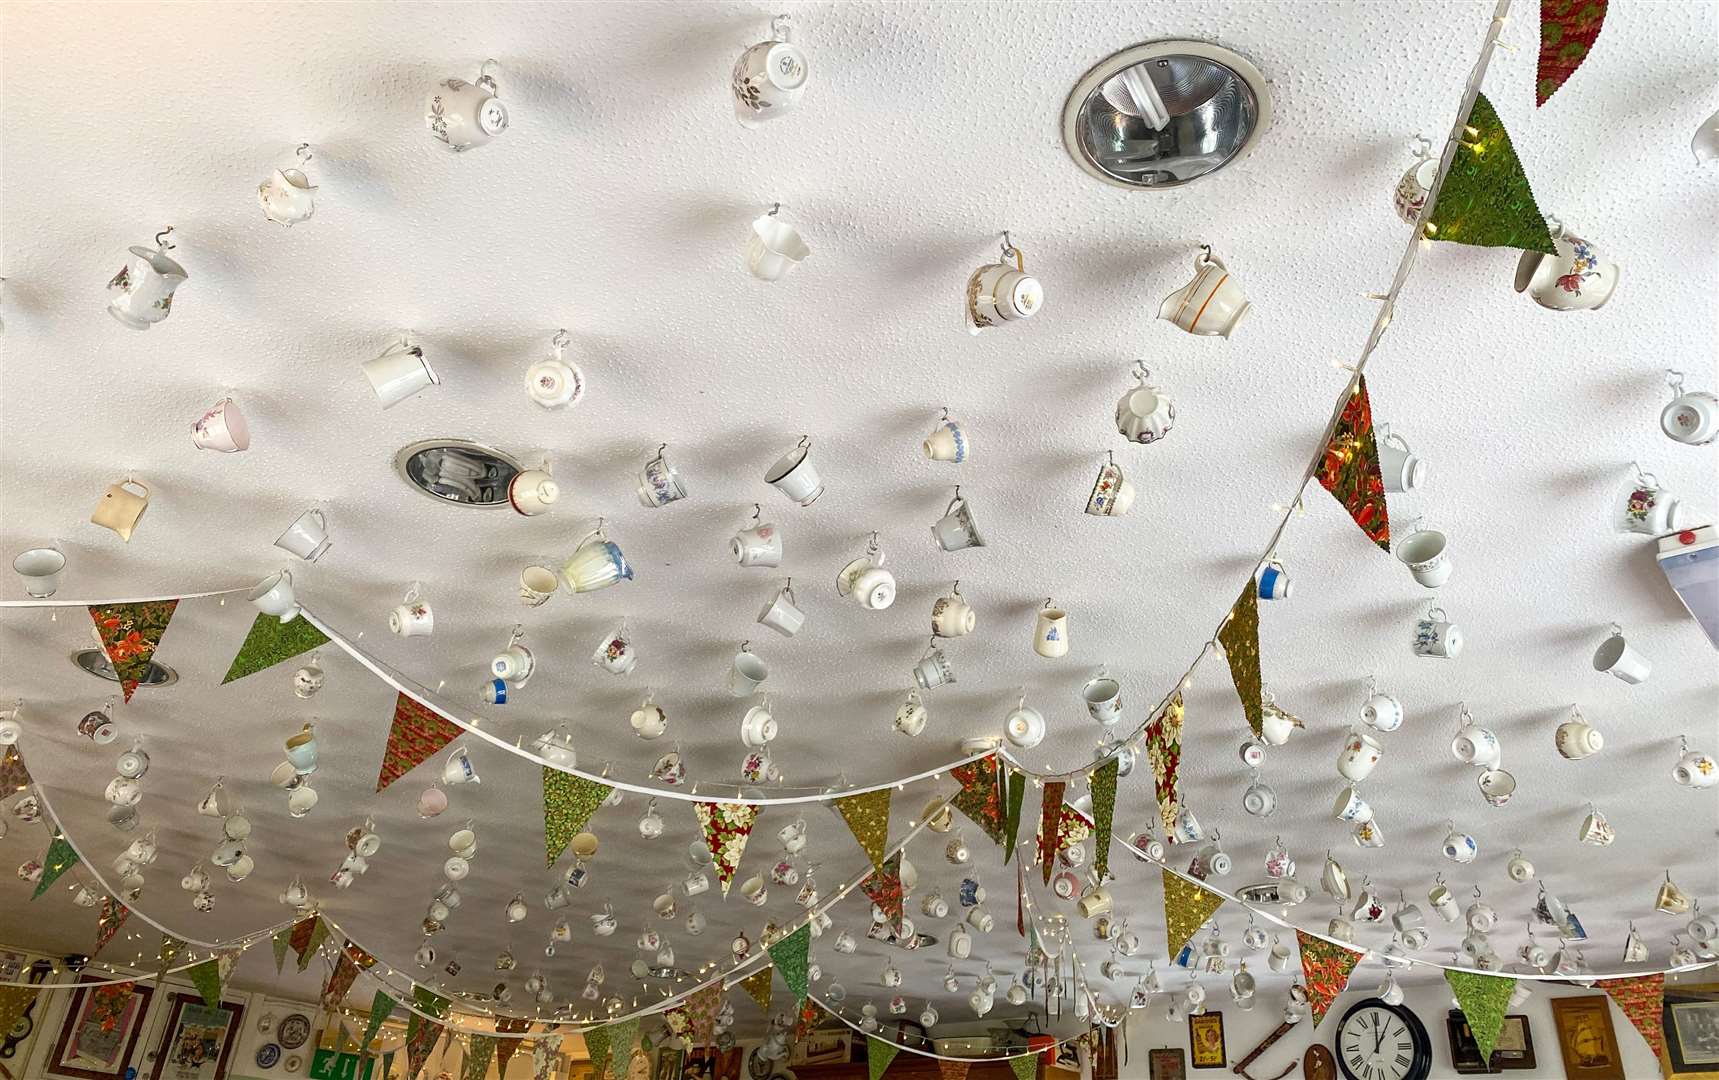 Perhaps my favourite part of the decor was the many teacups hanging precariously from the ceiling